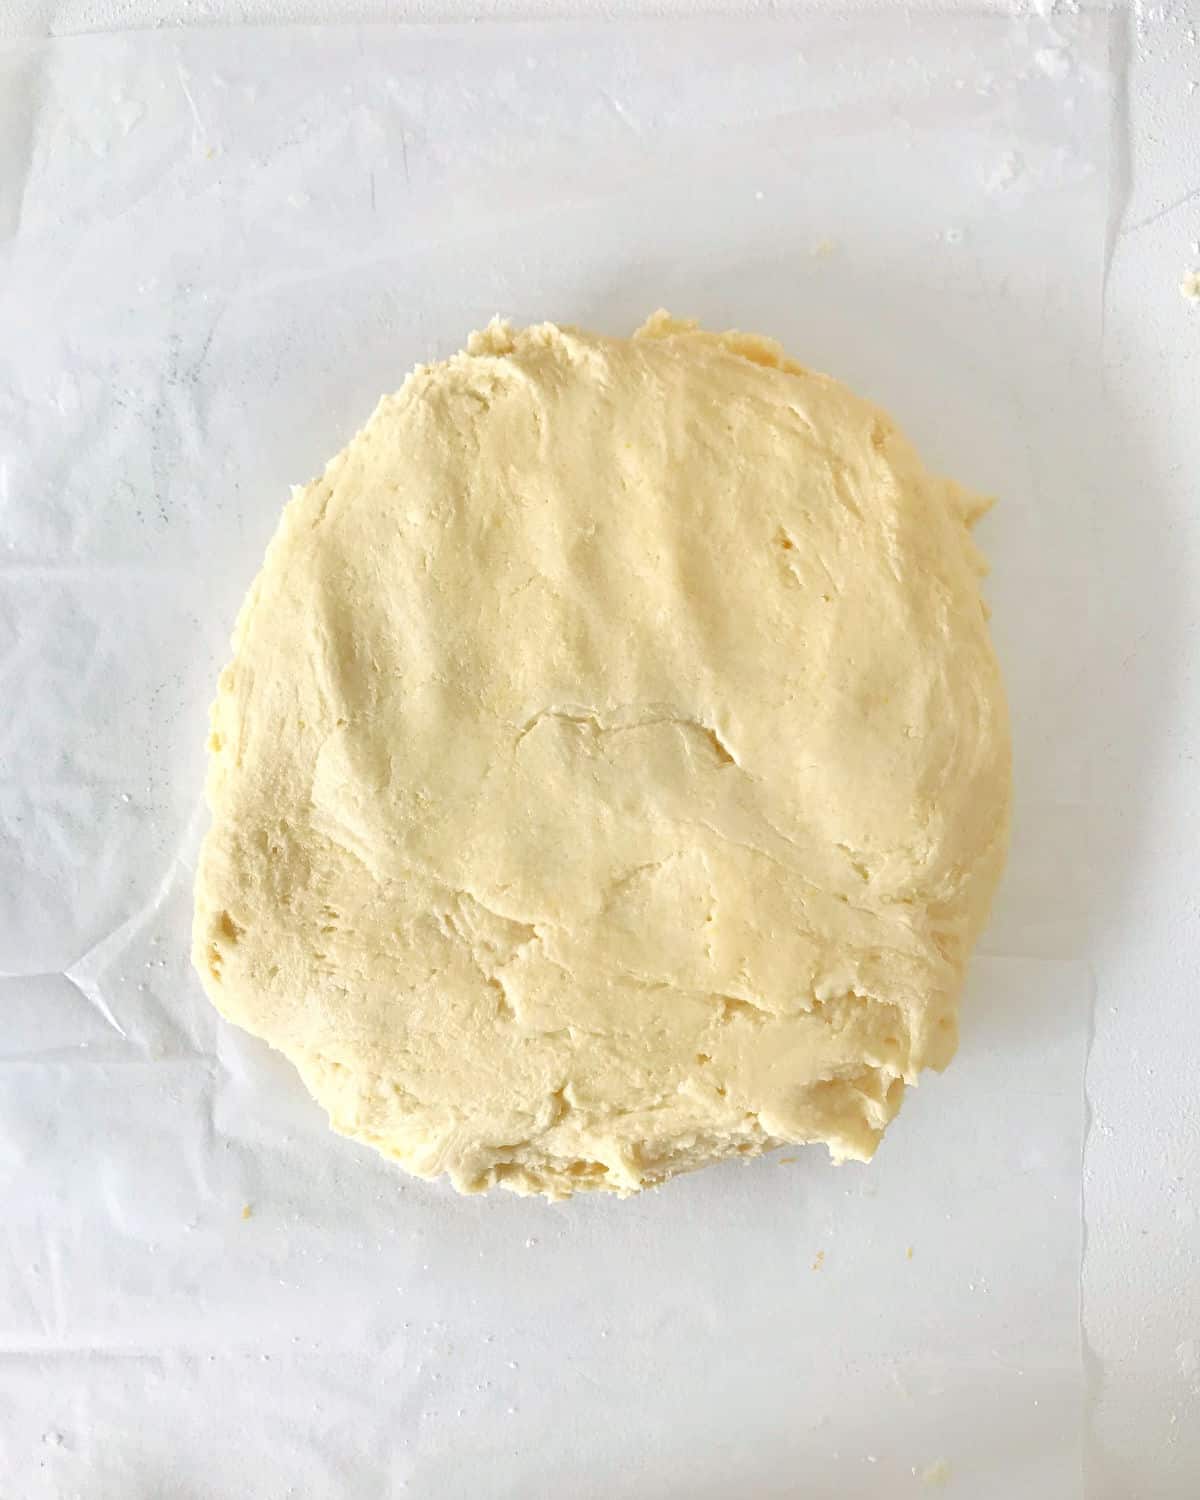 Round disc of vanilla dough on a transparent sheet of paper on a white surface.